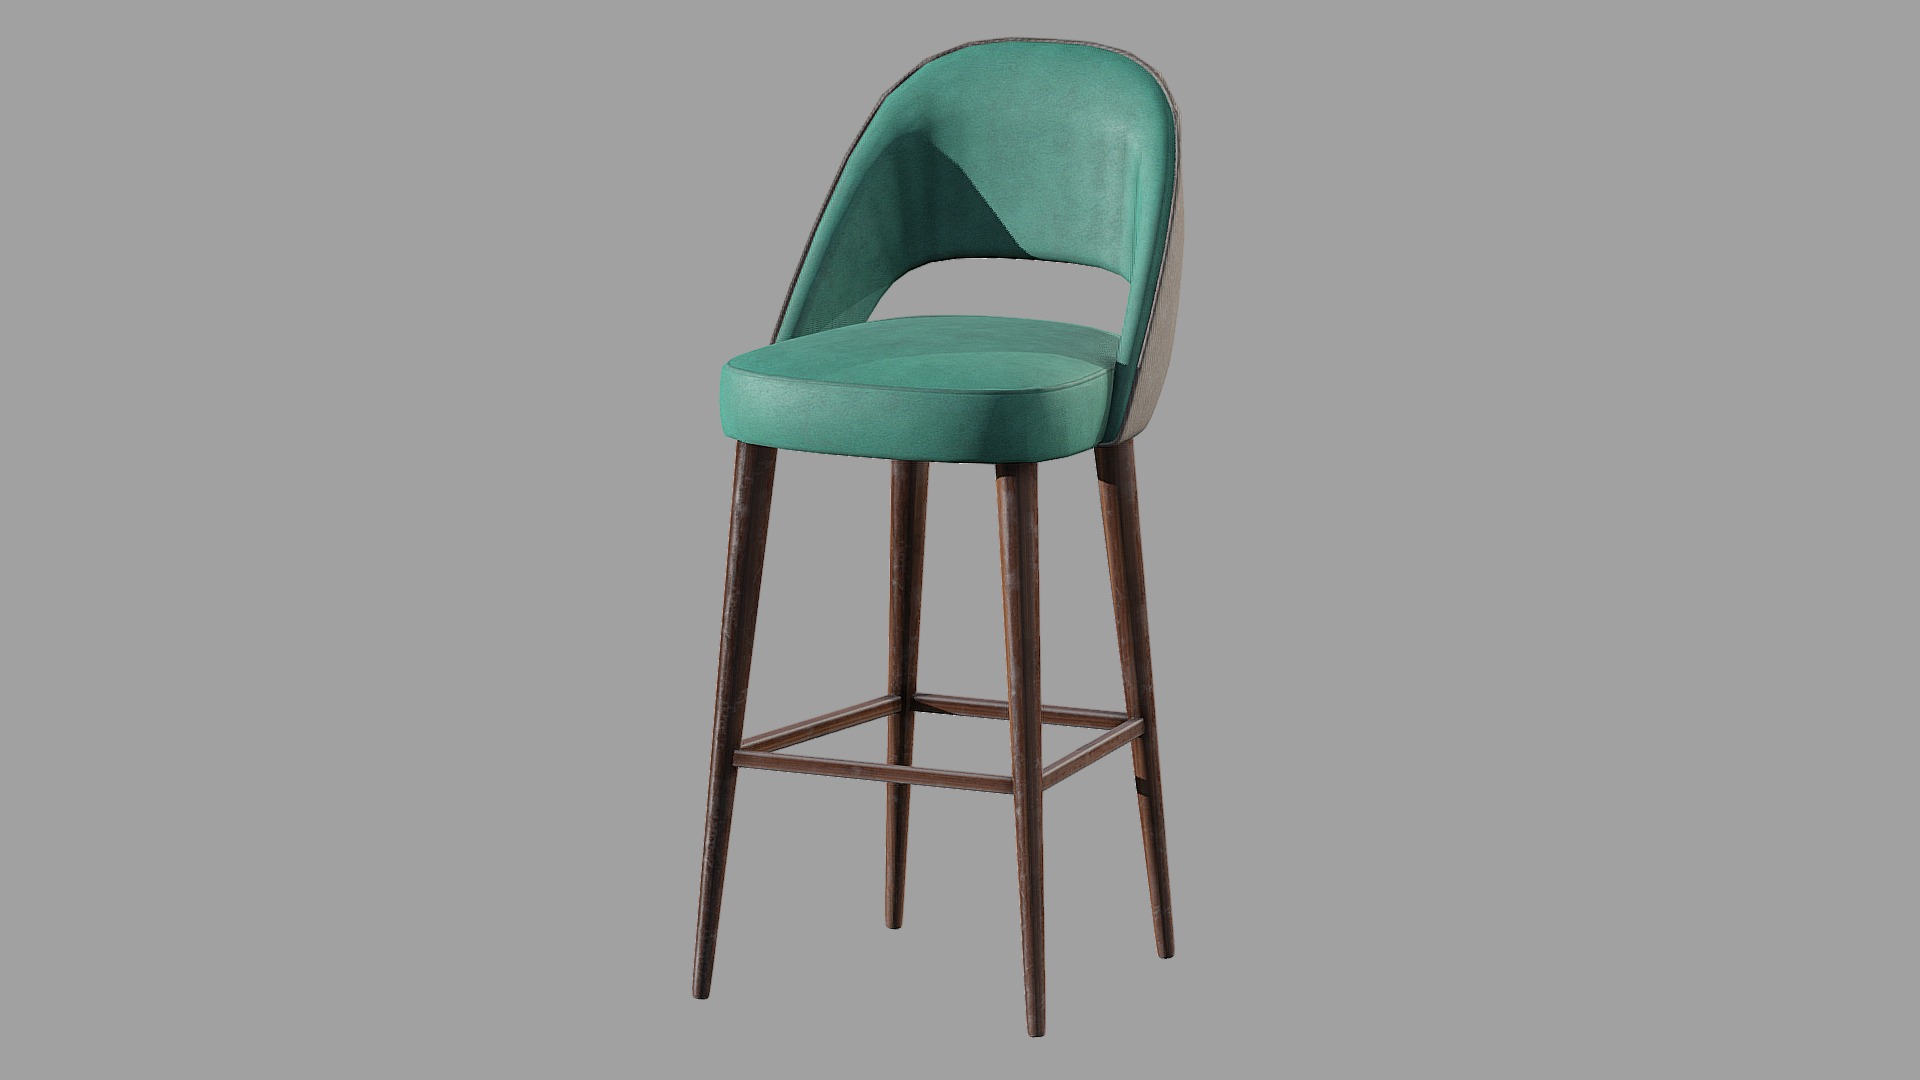 3D model Mambo AVA Chair - This is a 3D model of the Mambo AVA Chair. The 3D model is about a green chair with a blue cushion.